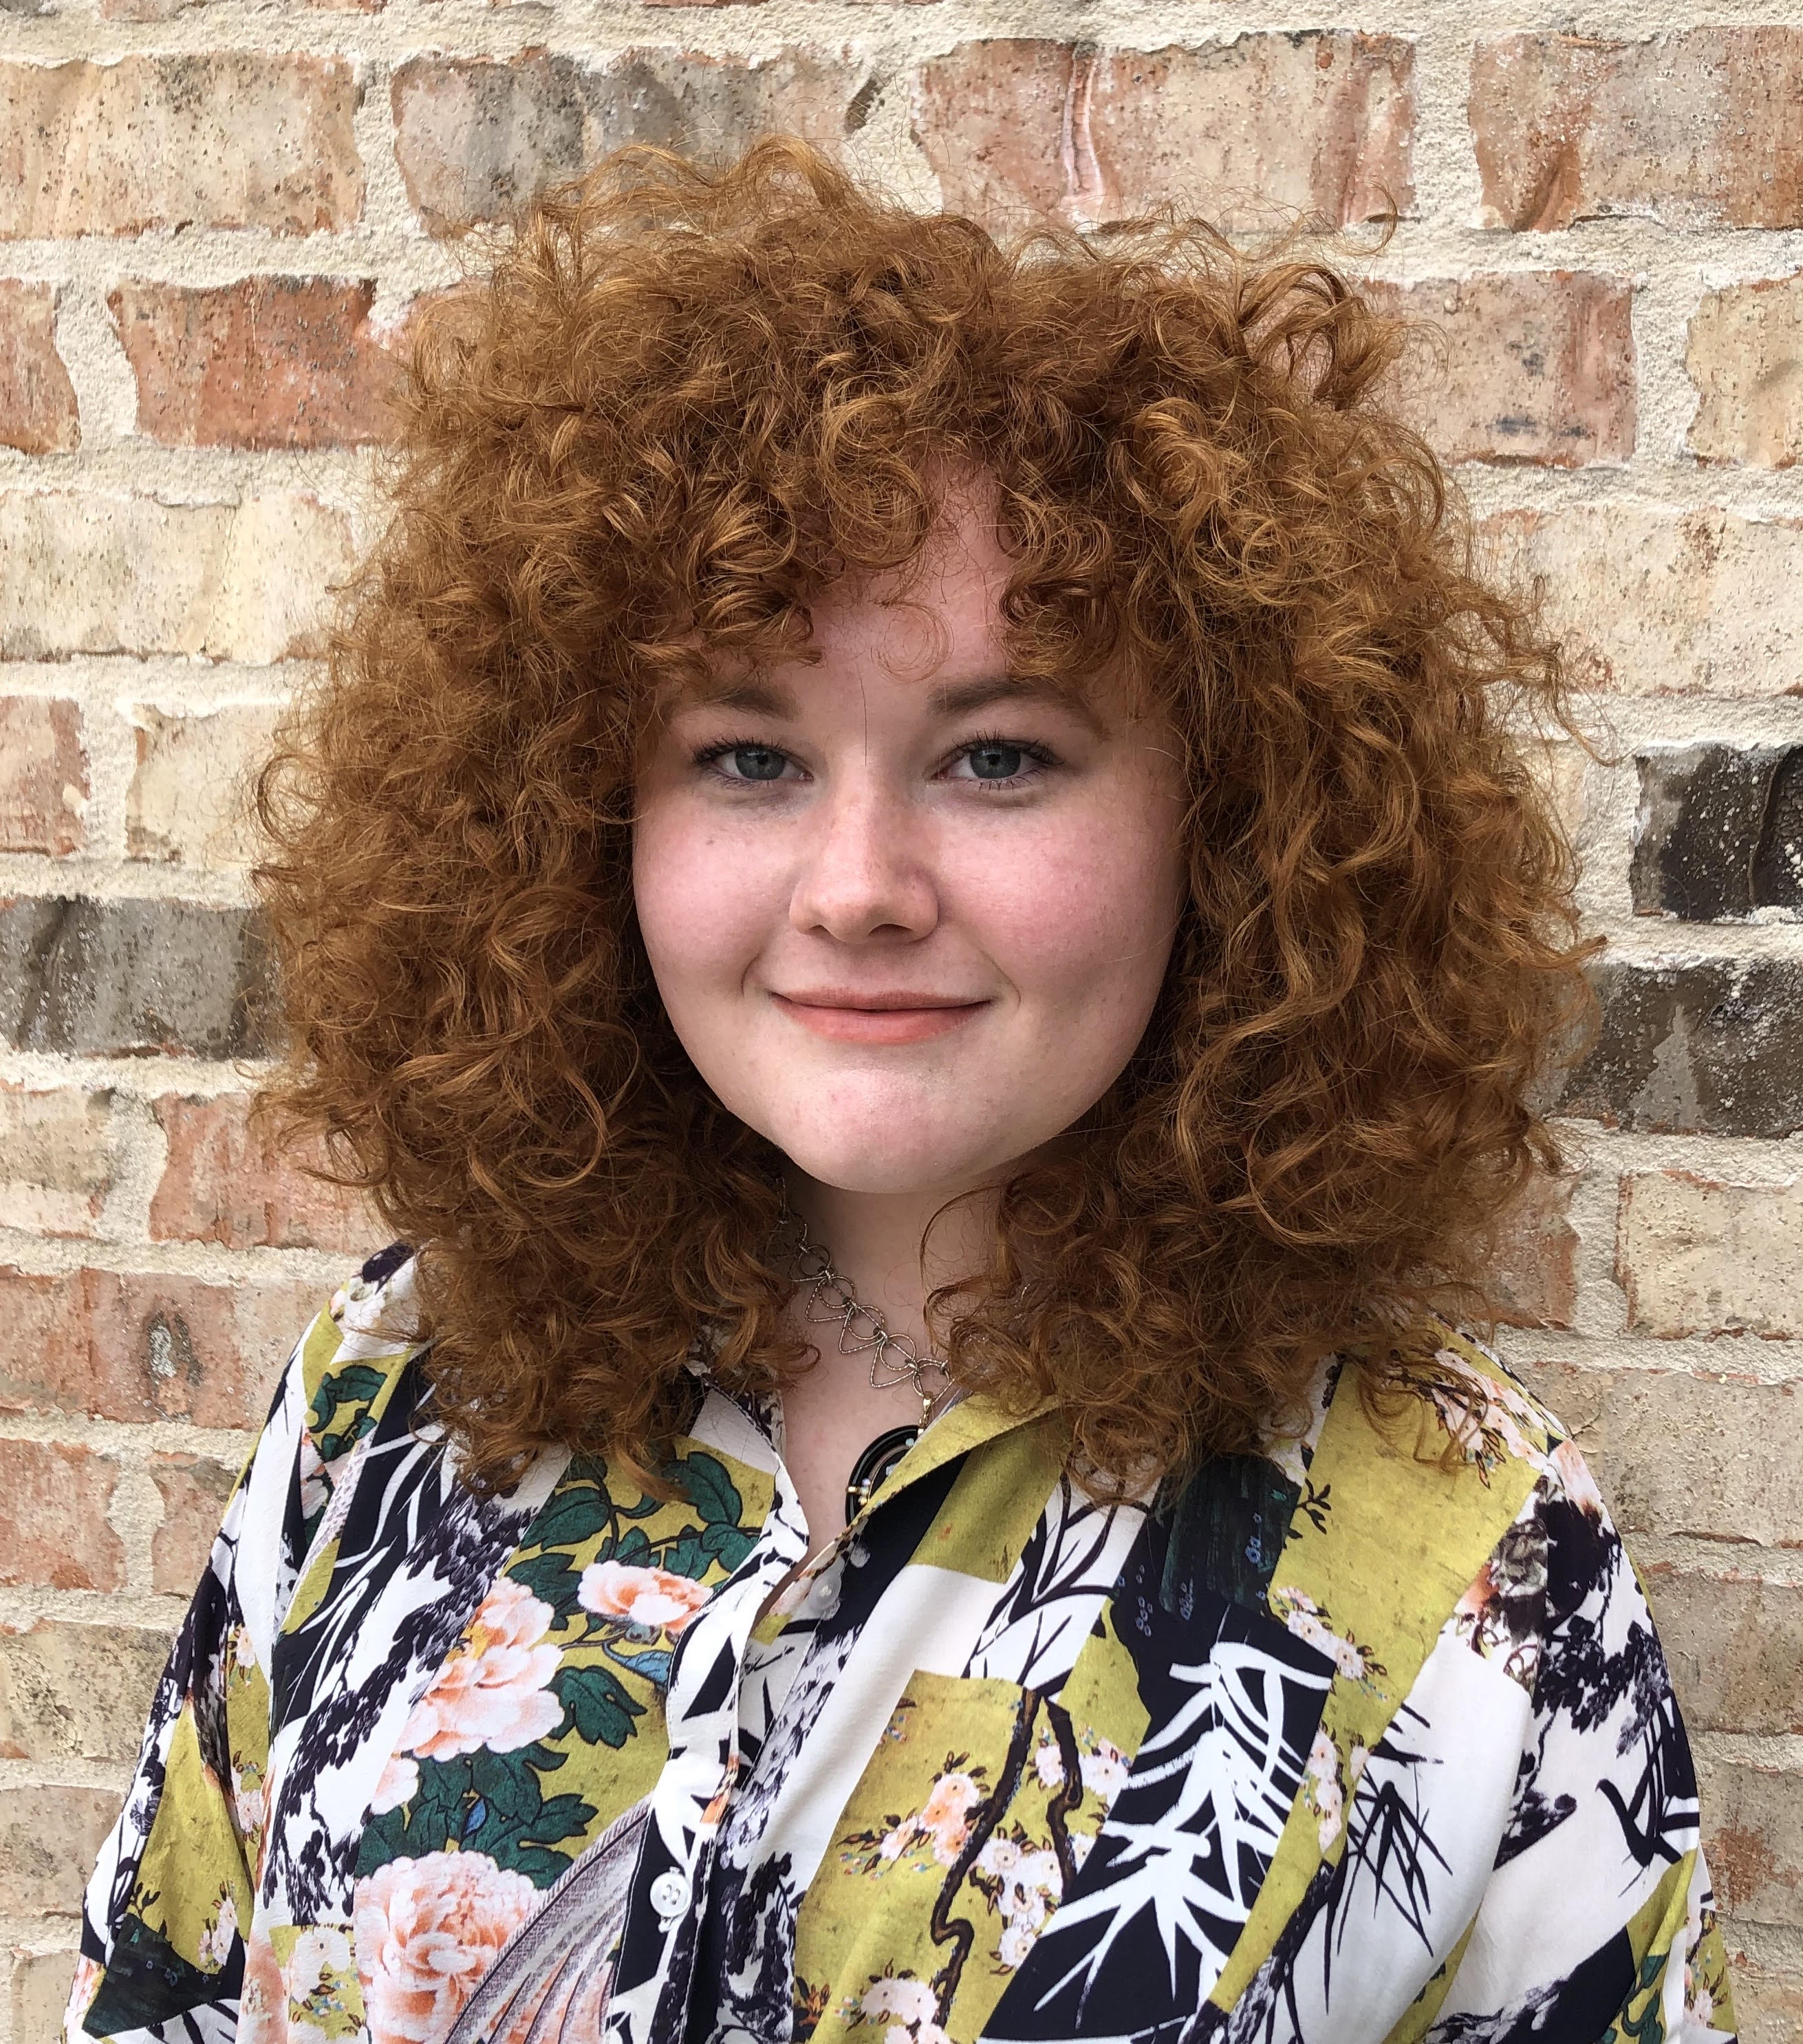 Caroline Cox is an emerging art historian and curator passionate about creating dialogue and sparking change through art. She works as the Research Assistant and Community Manager for Less Than Half